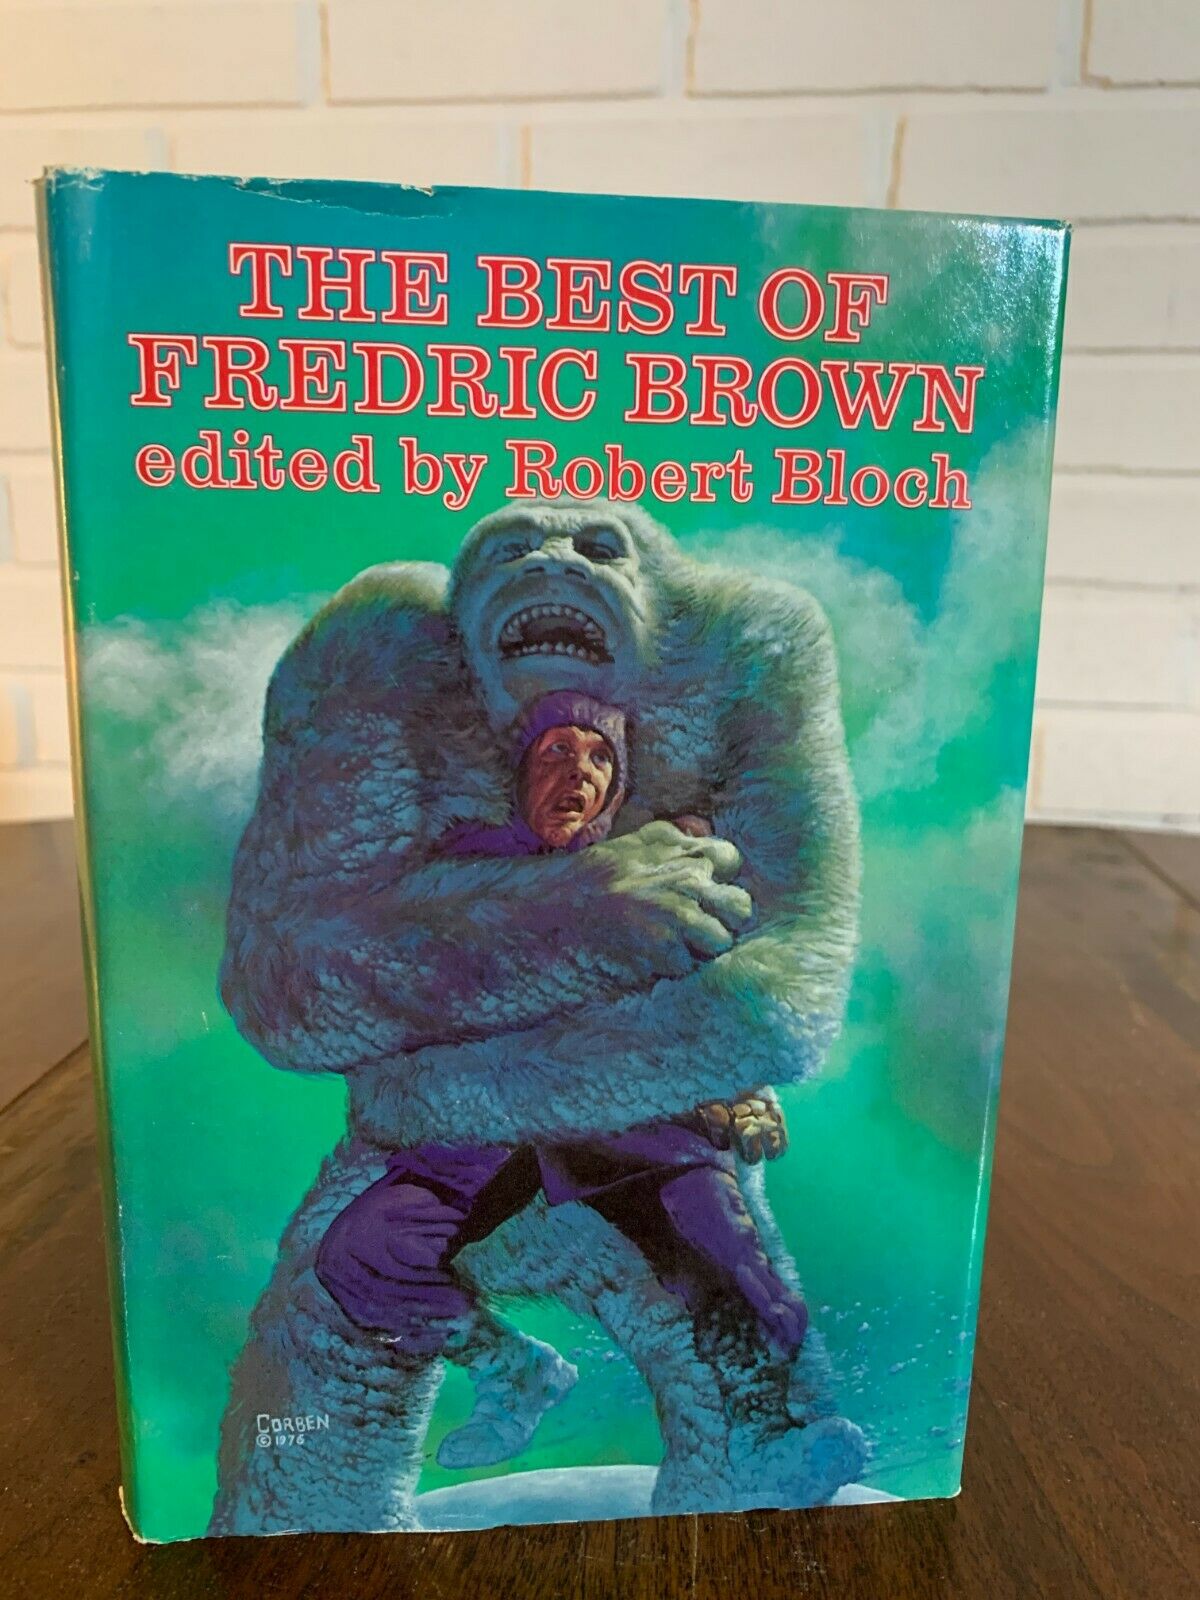 The Best of Fredric Brown edited by Robert Bloch - Science Fiction Book Club ed